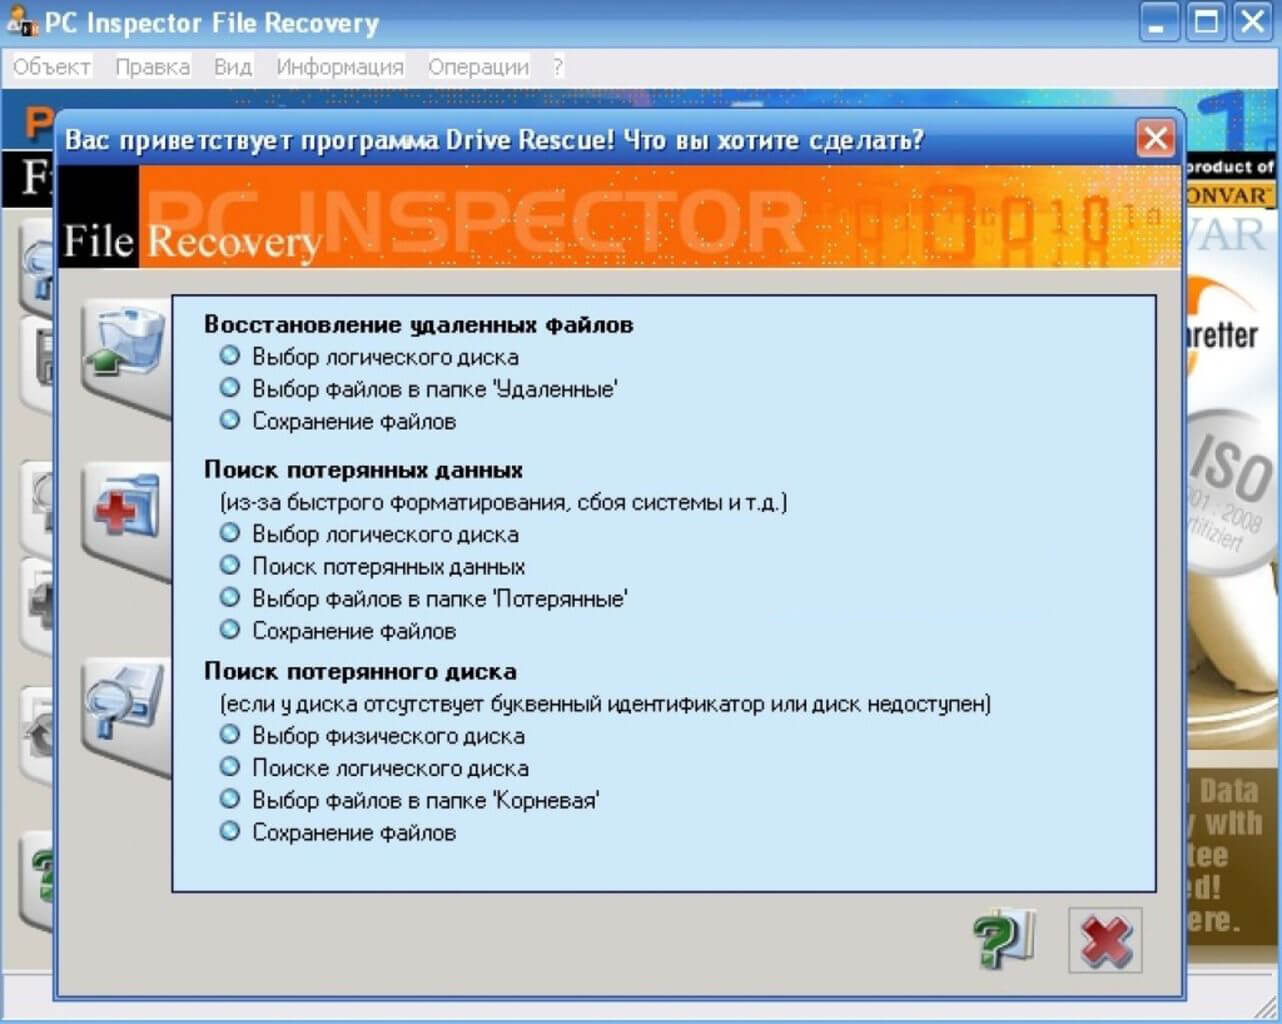 PC INSPECTOR File Recovery